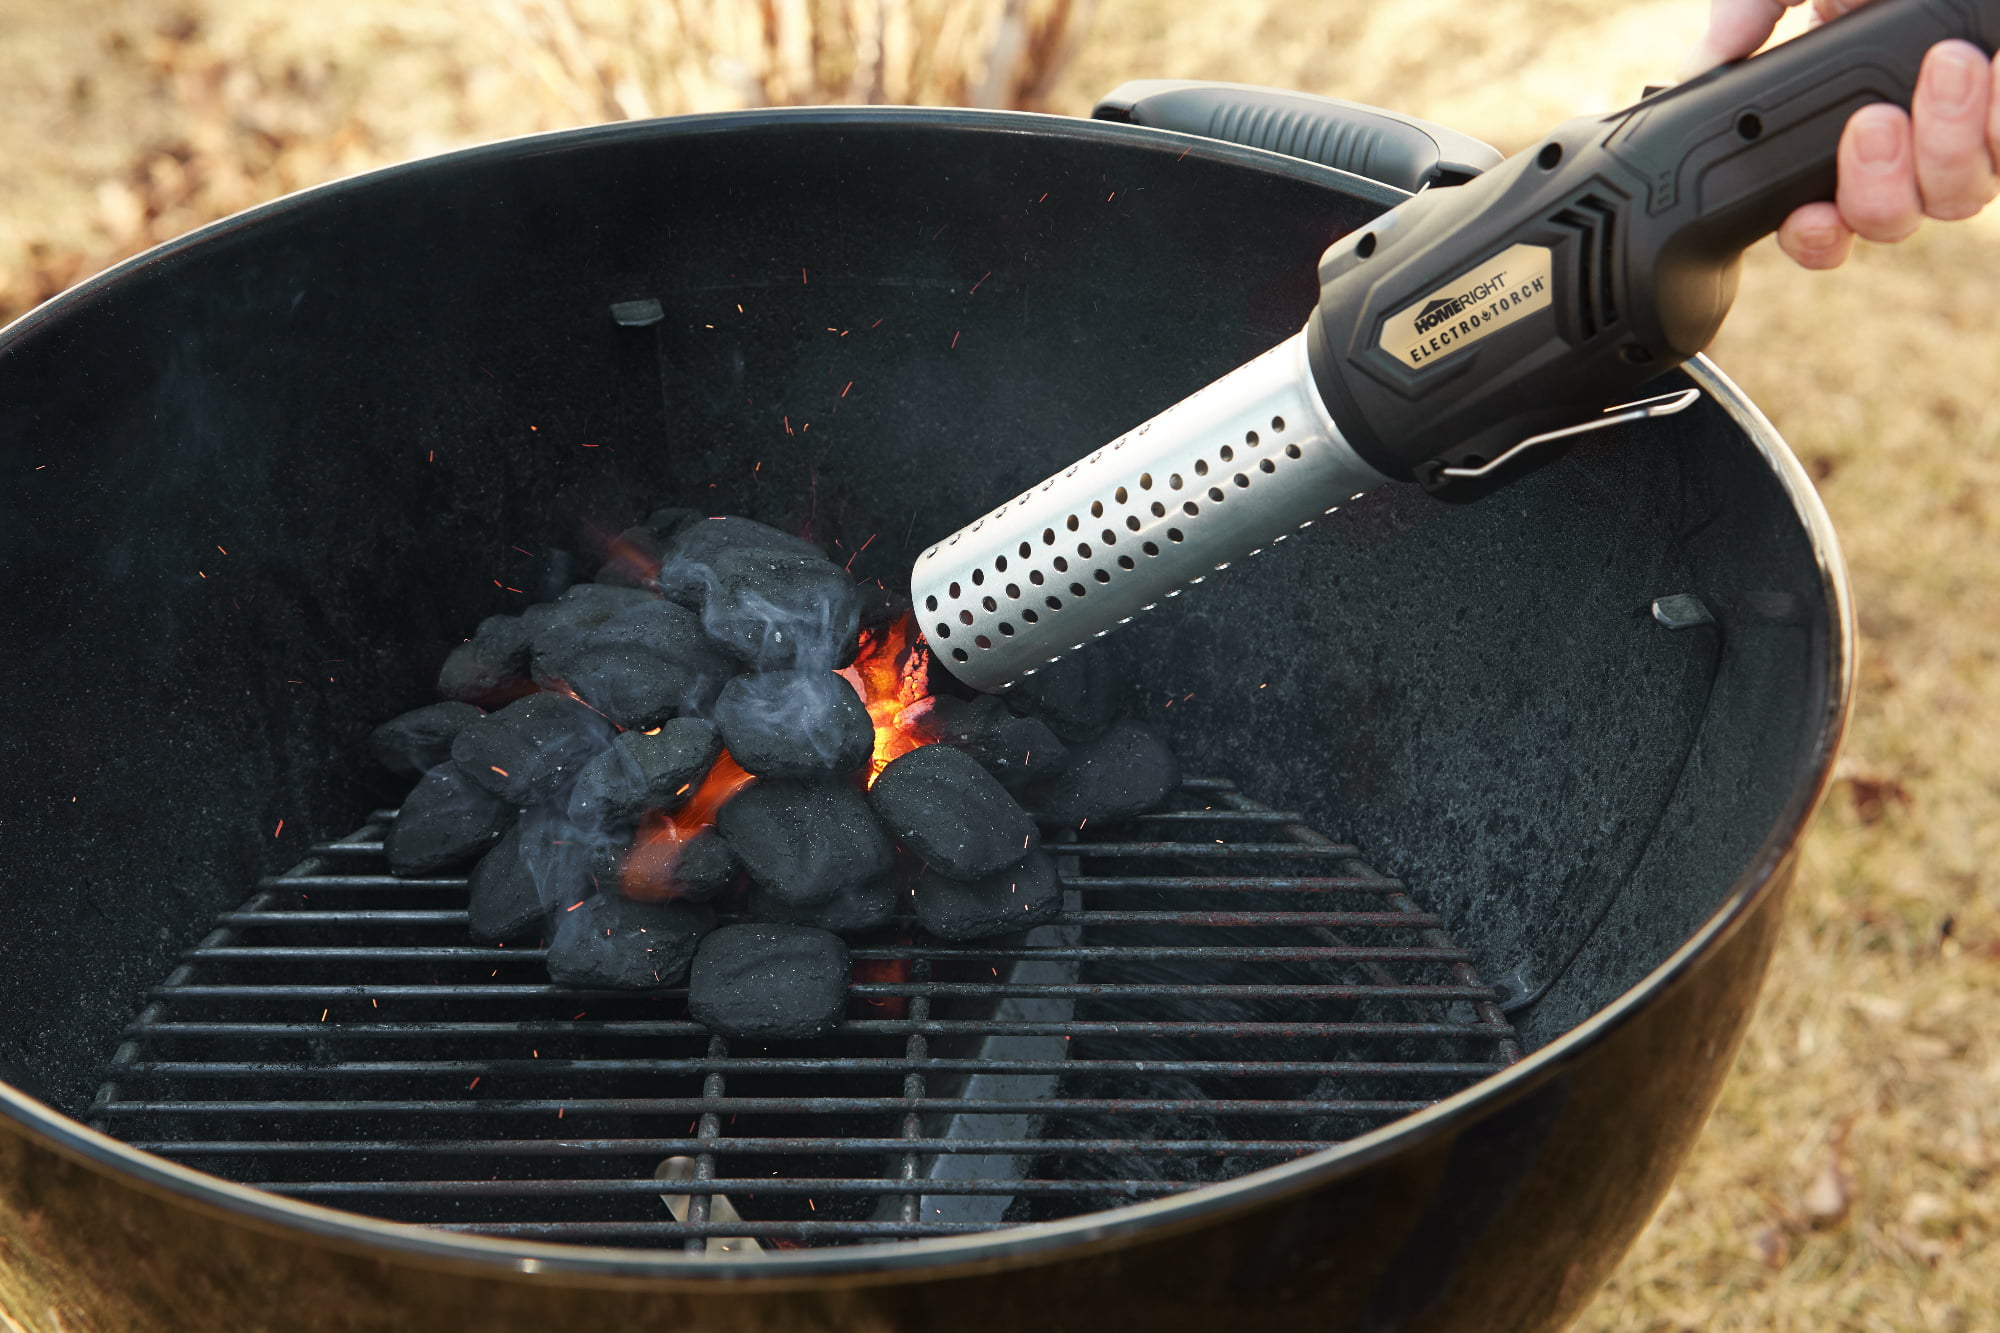 Homeright Electro-Torch Fire and Charcoal Starter